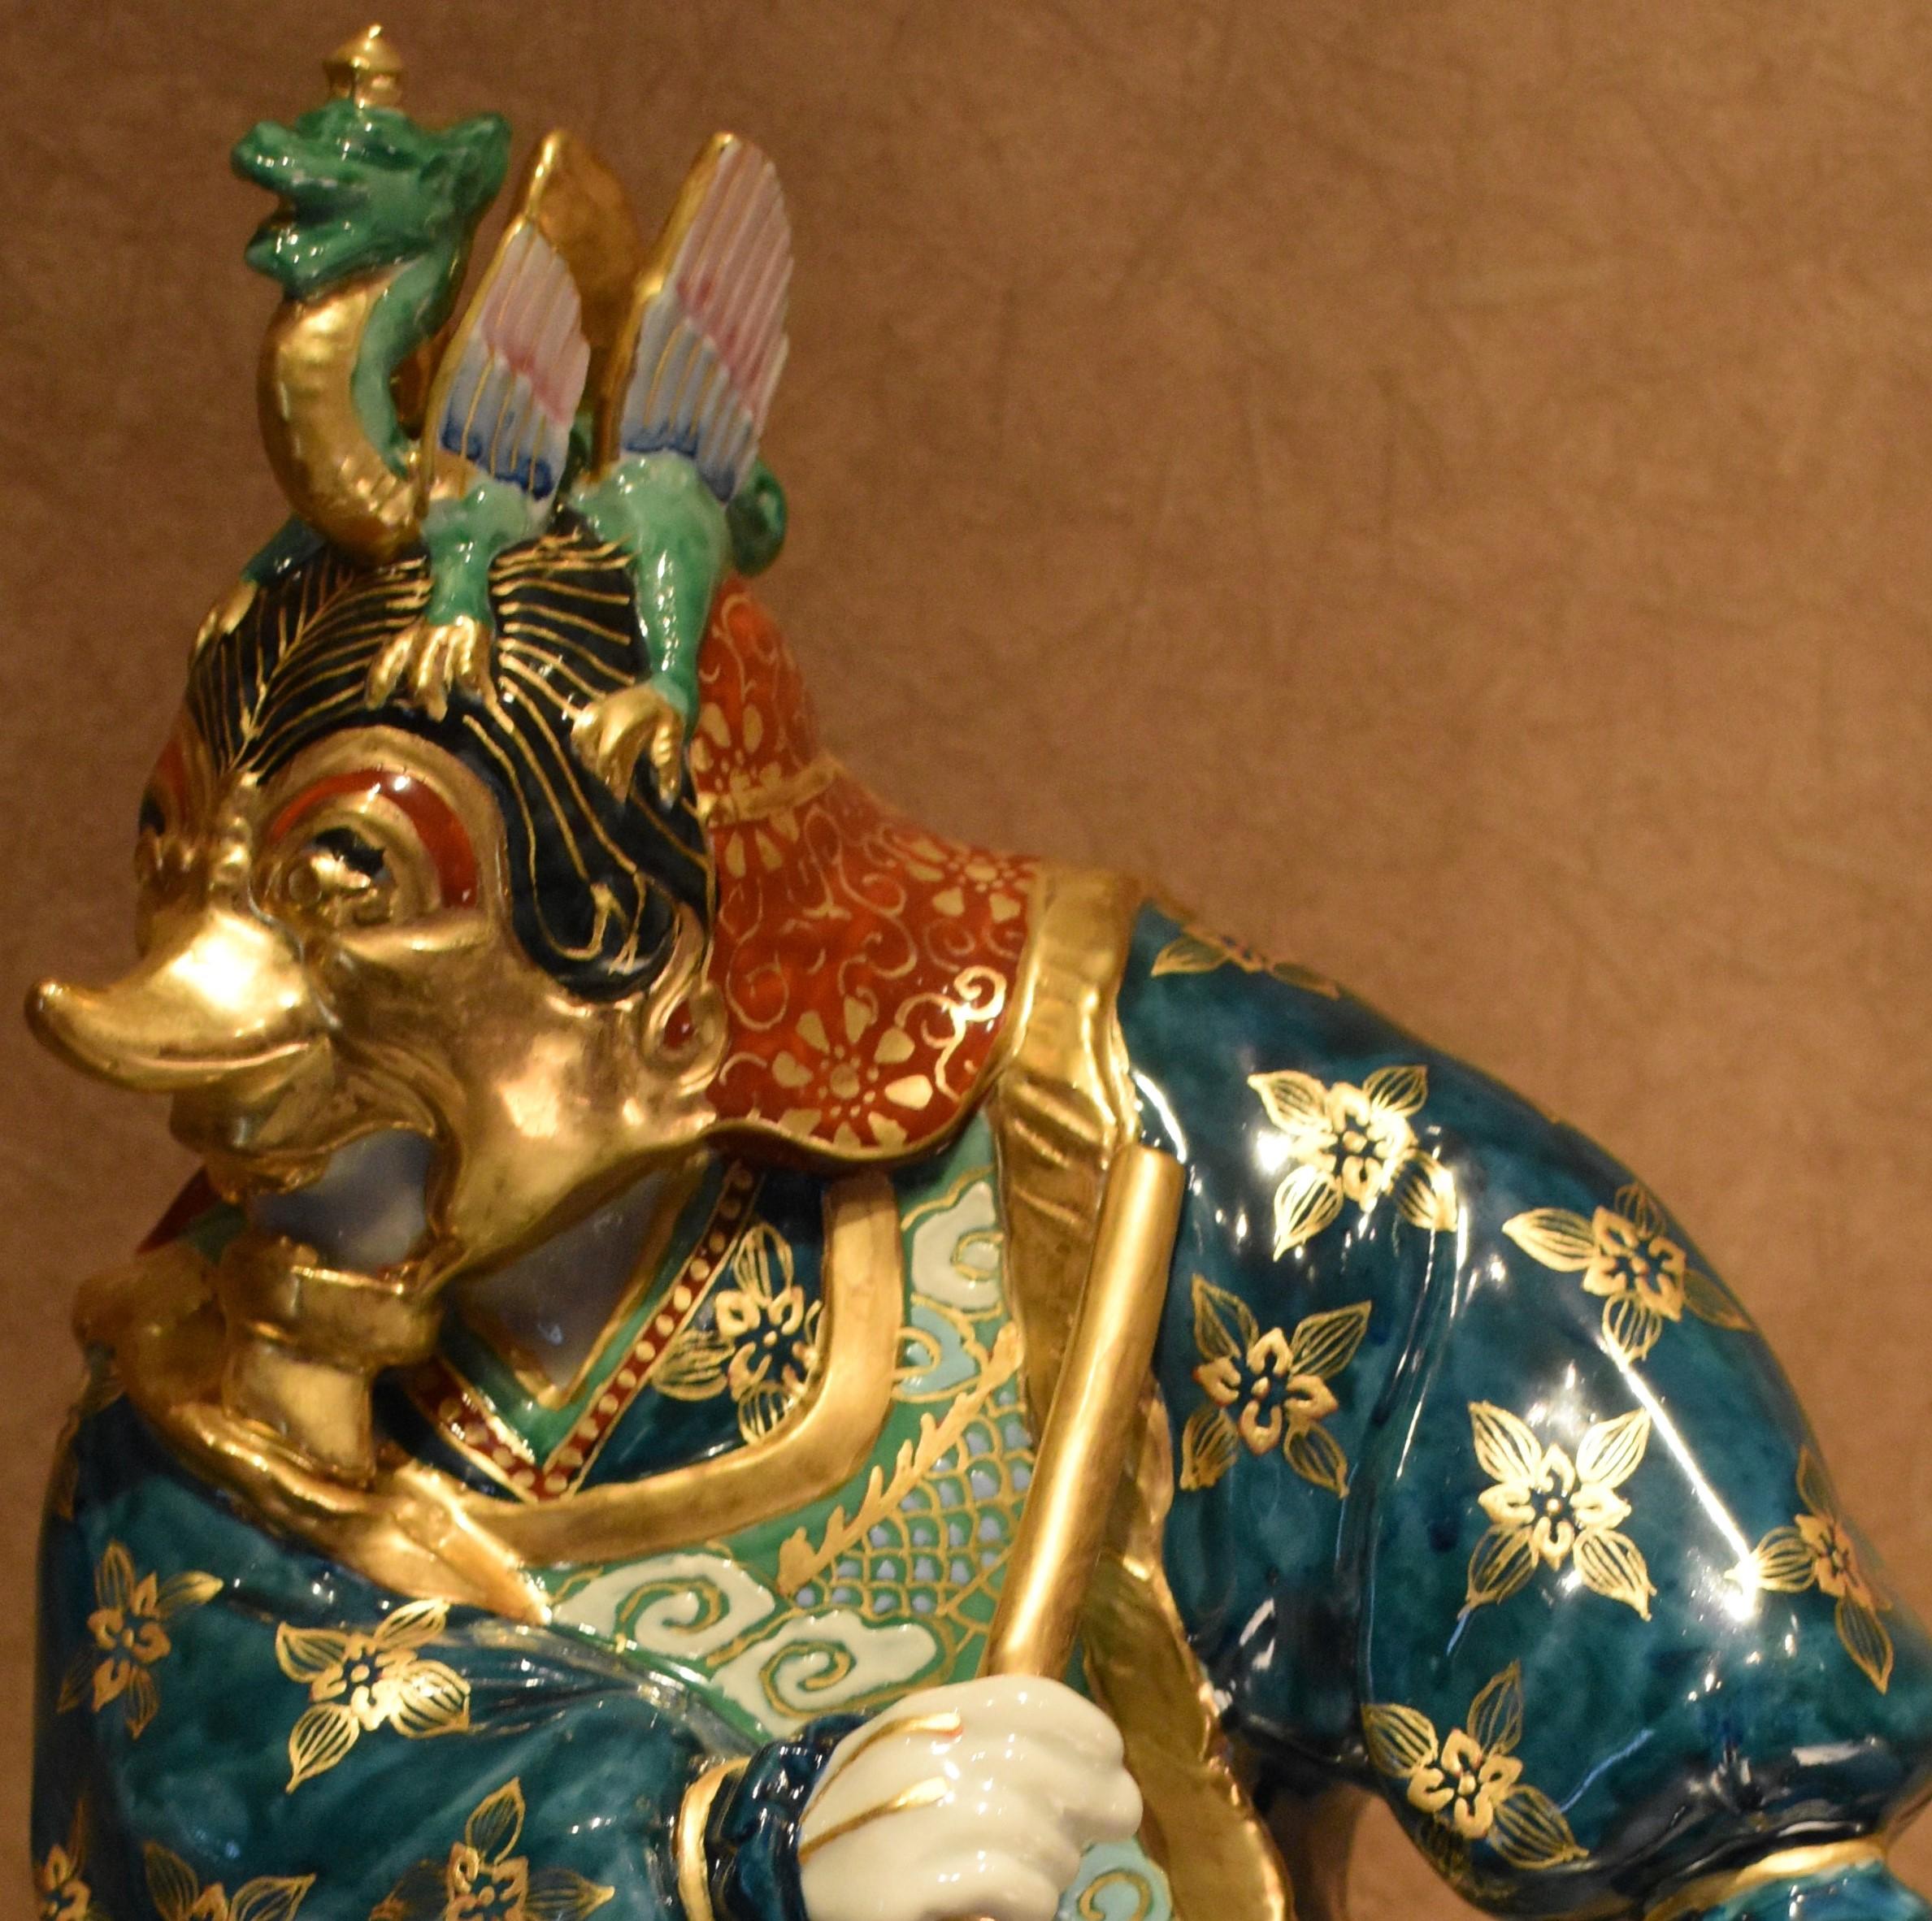 Unique porcelain figurine of Prince Lanling, hero-warrior of 6th century, China. This intricately detailed figurine is the creation of widely respected master porcelain artist of the Kutani region of Japan. Faithfully recreating the flowing folds of